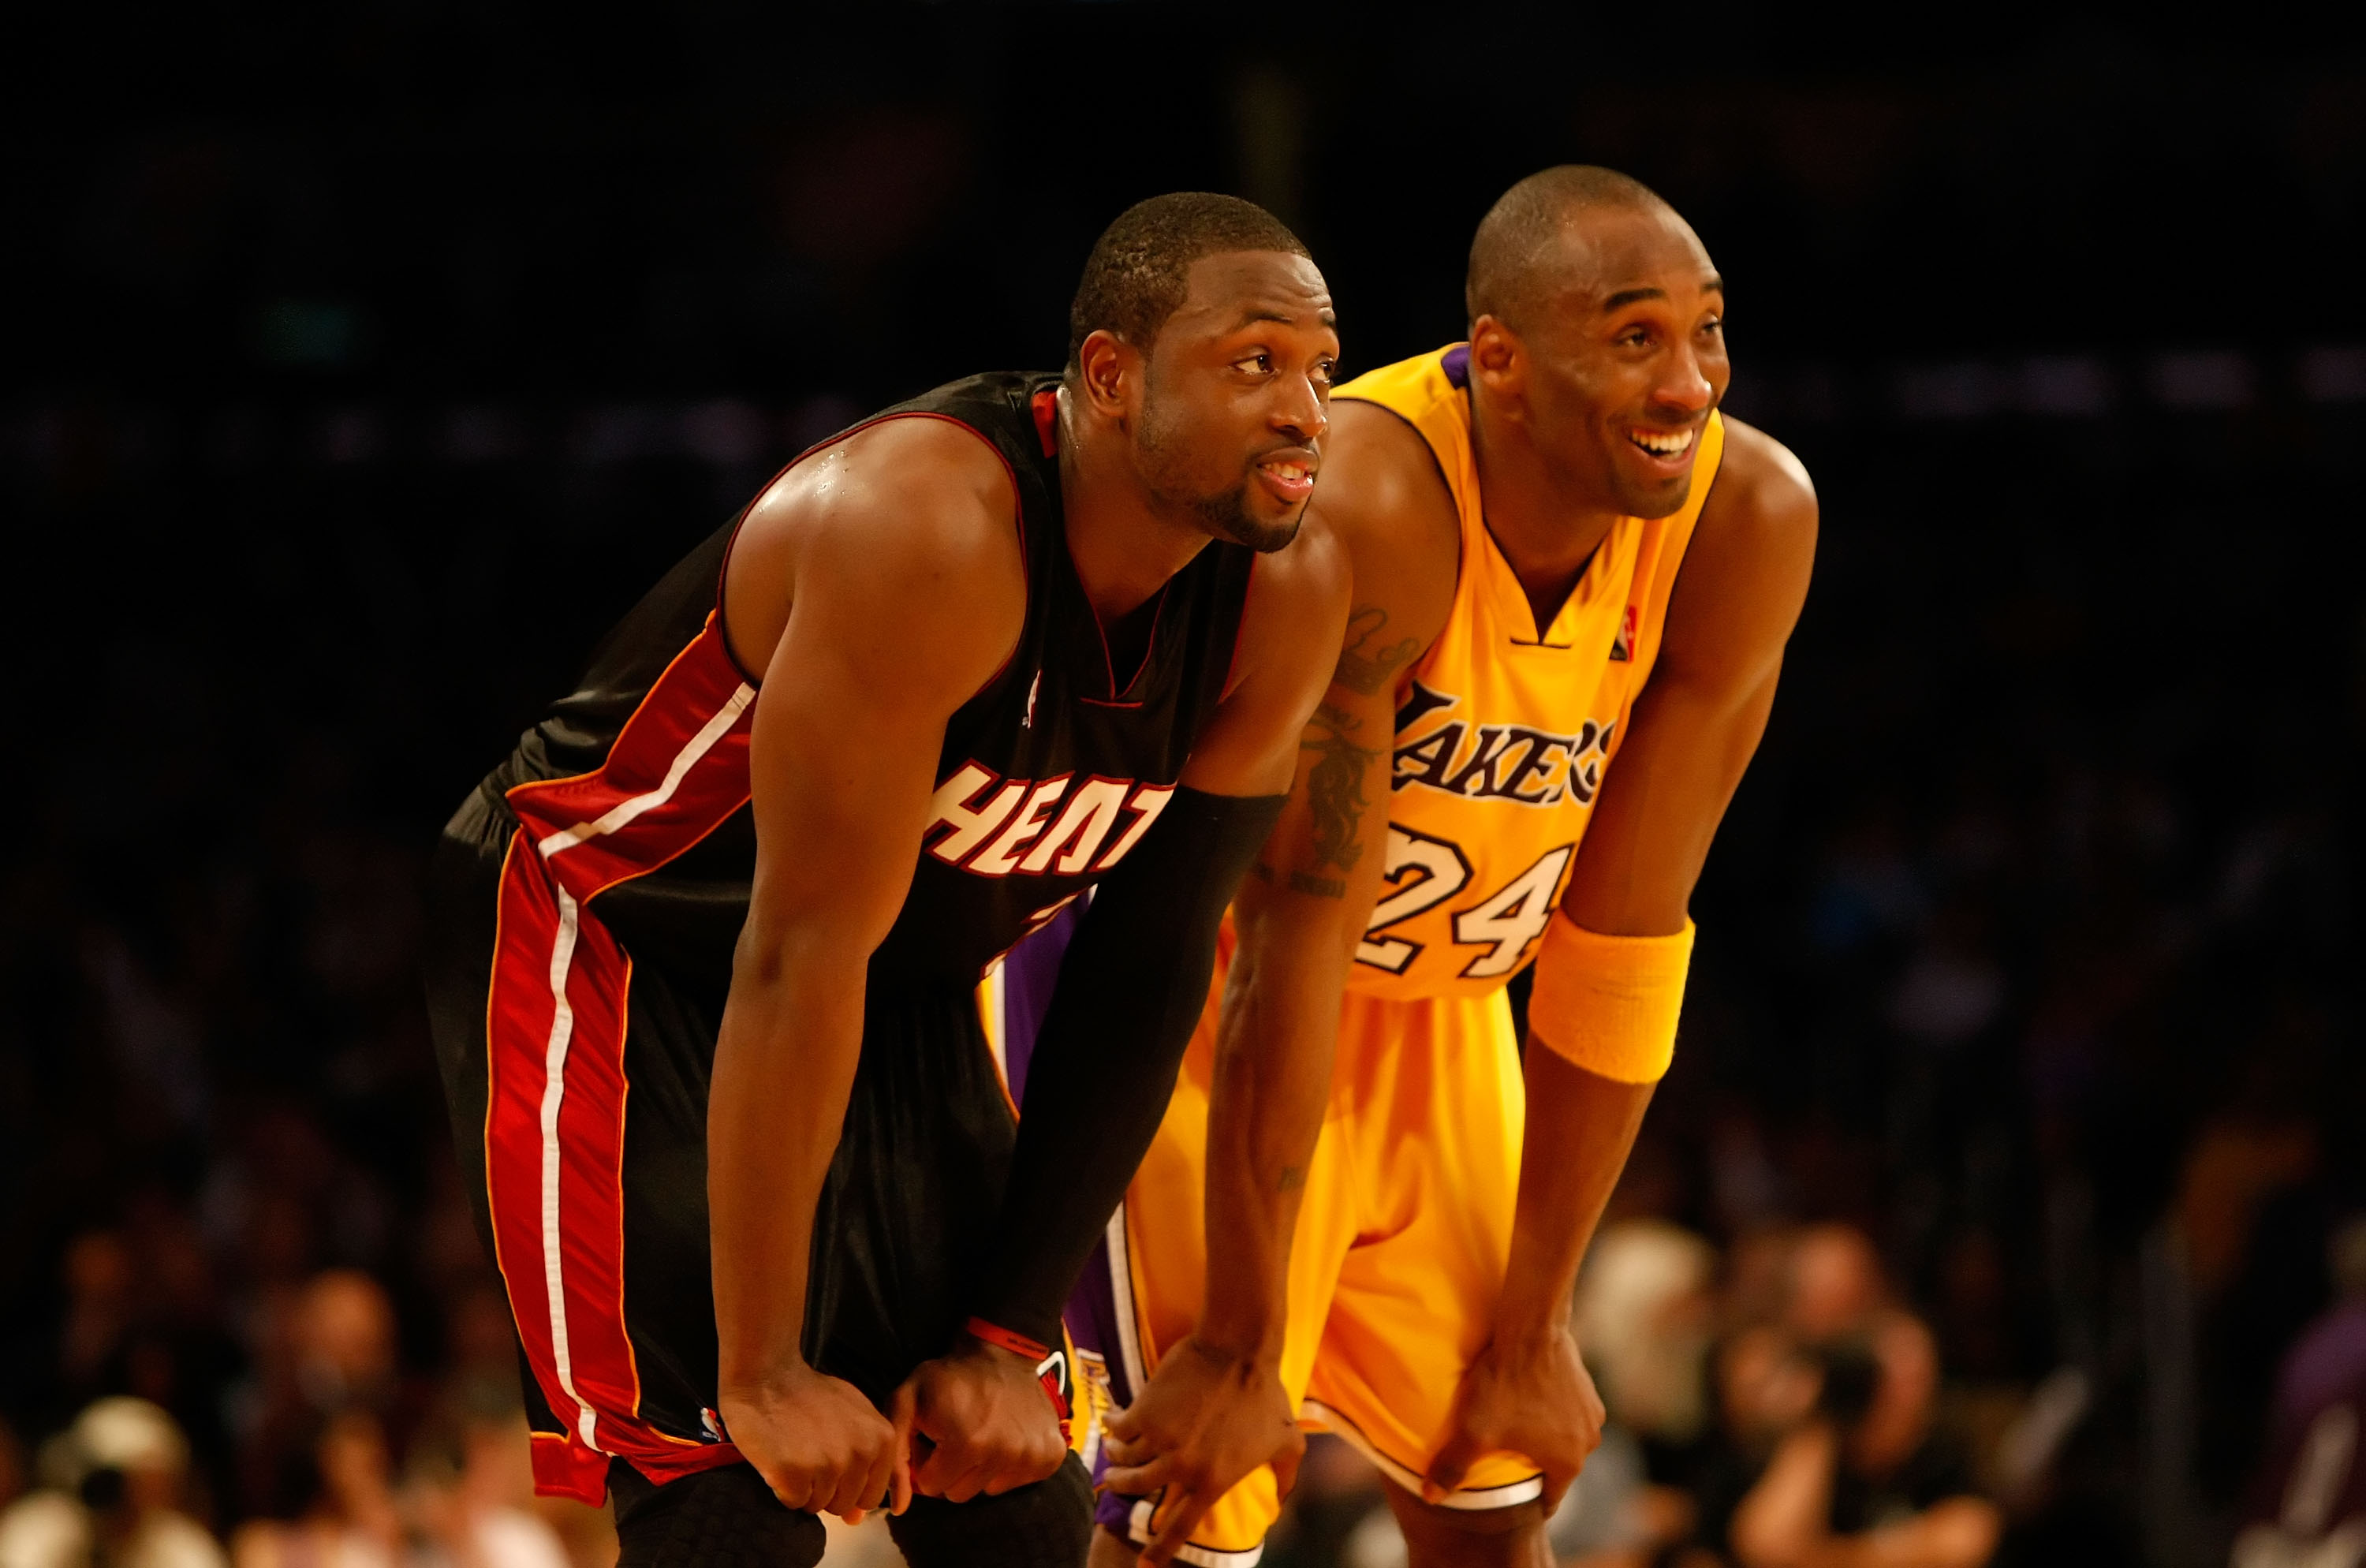 LOS ANGELES, CA - DECEMBER 04:  Kobe Bryant #24 of the Los Angeles Lakers and Dwayne Wade #3 of the Miami Heat share a laugh in the fourth quarter at Staples Center on December 4, 2009 in Los Angeles, California. The Lakers defeated the Heat 108-107. NOTE